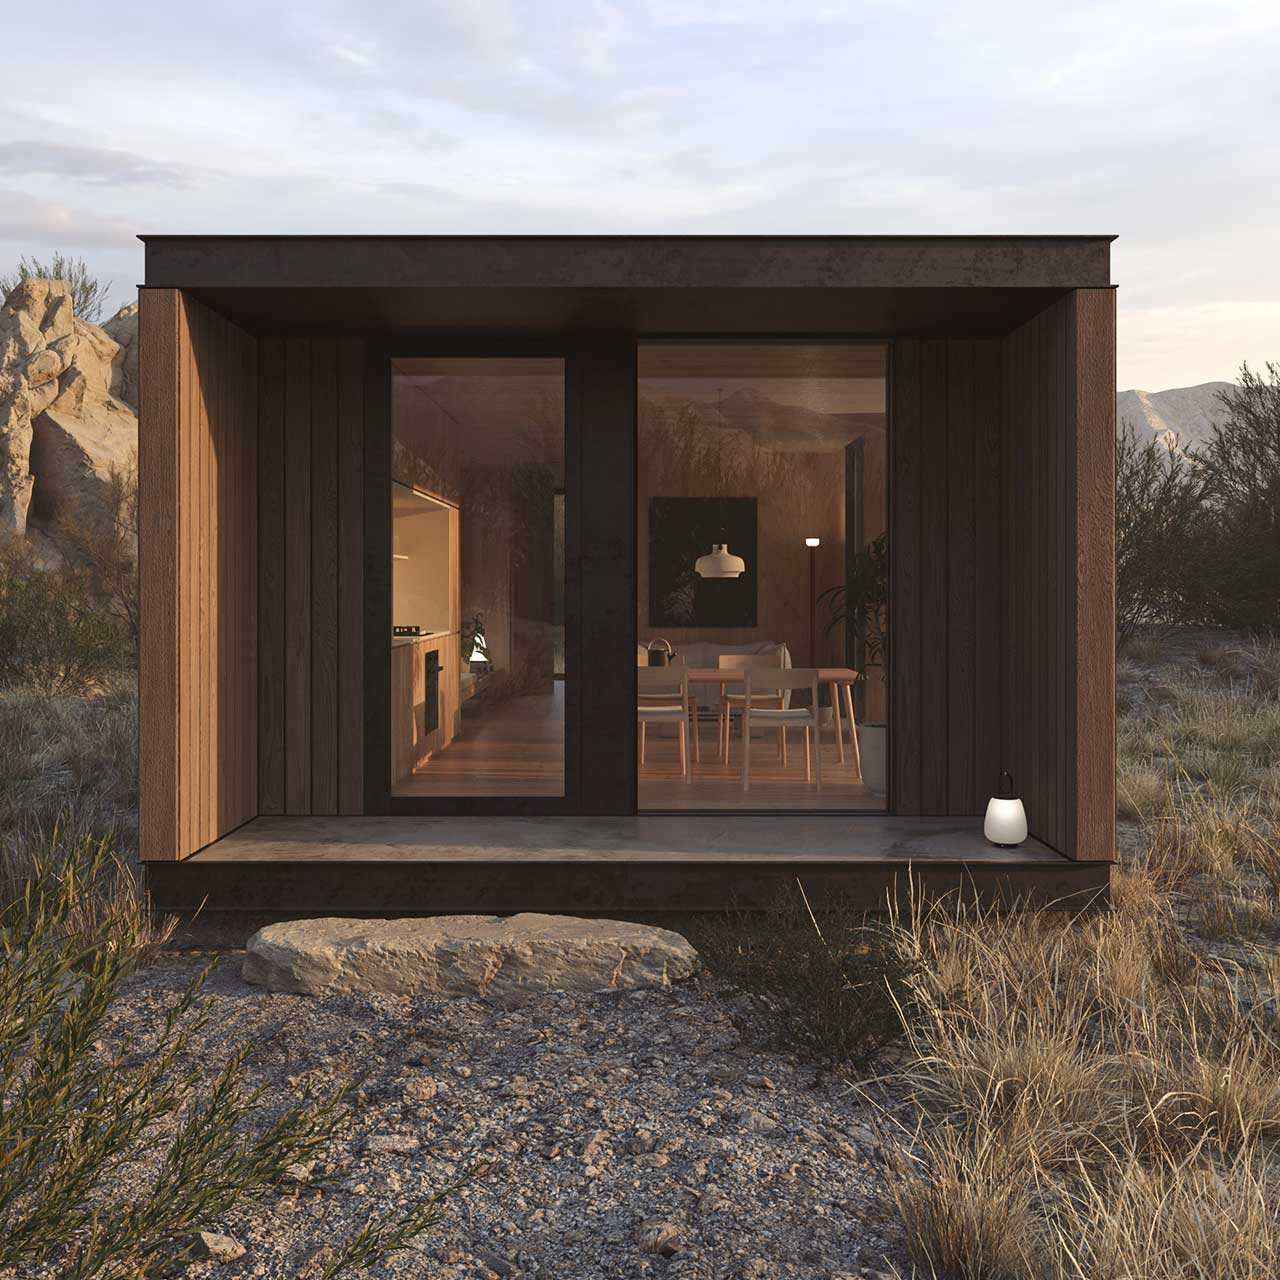 Designing a Minimalist Micro Home: From Concept to Reality with